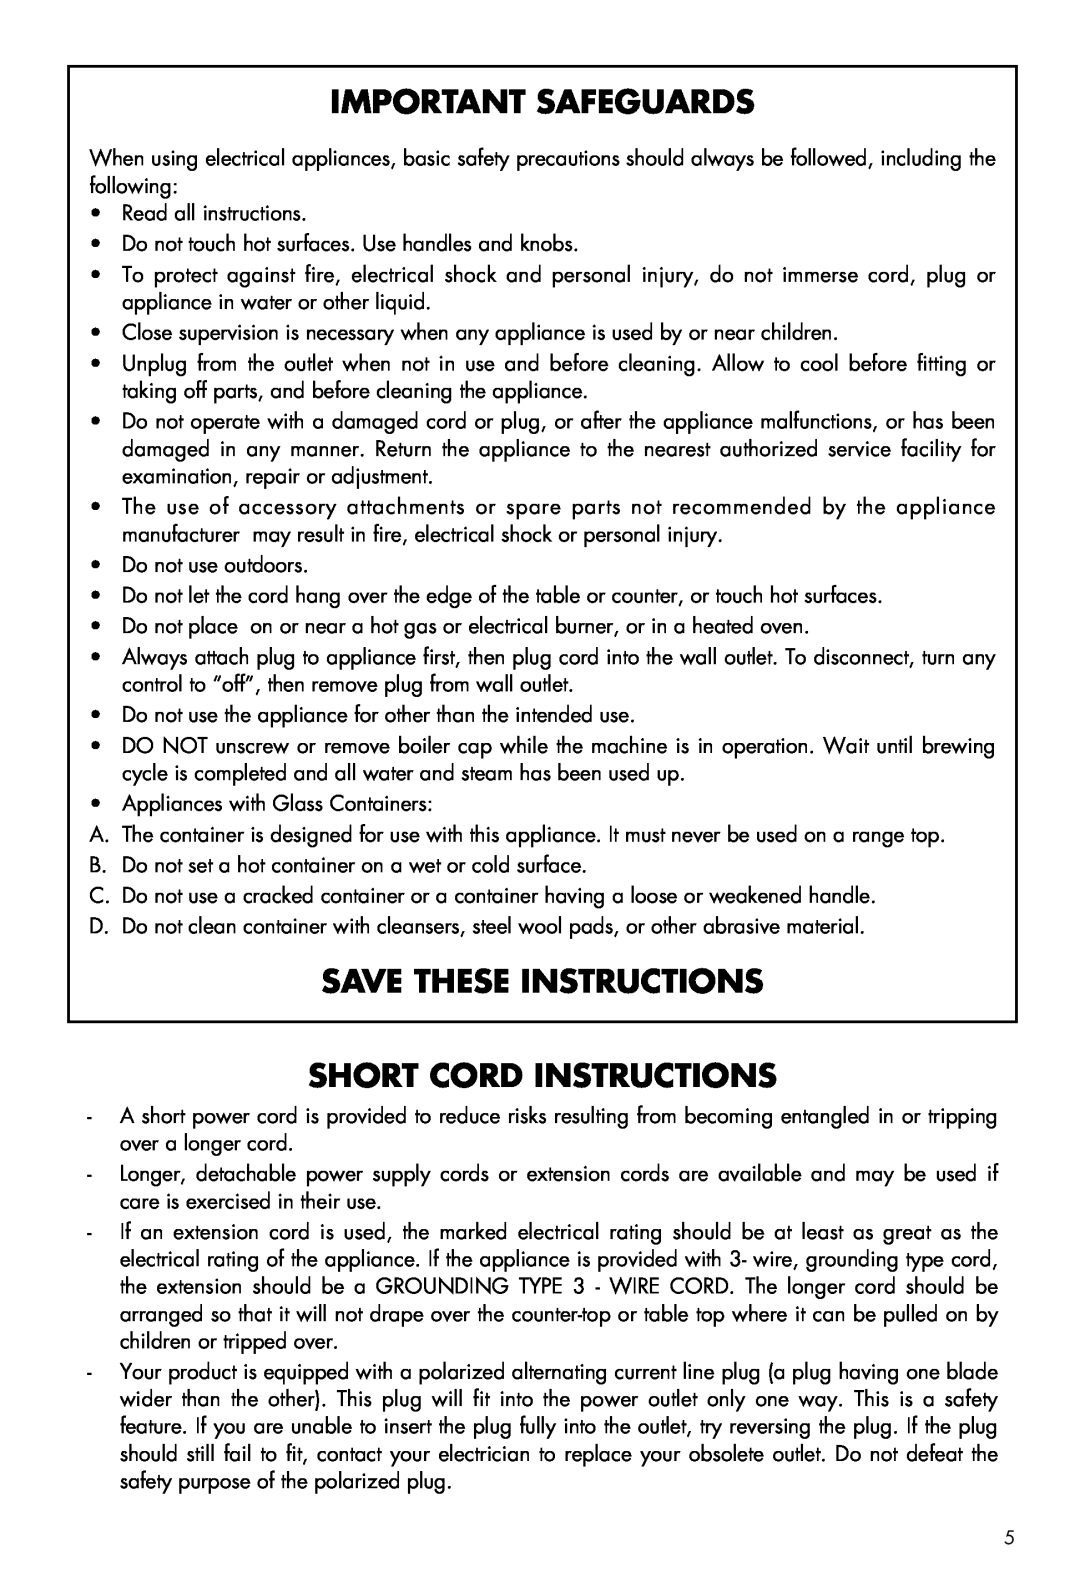 DeLonghi BC080 manual Important Safeguards, Save These Instructions Short Cord Instructions 